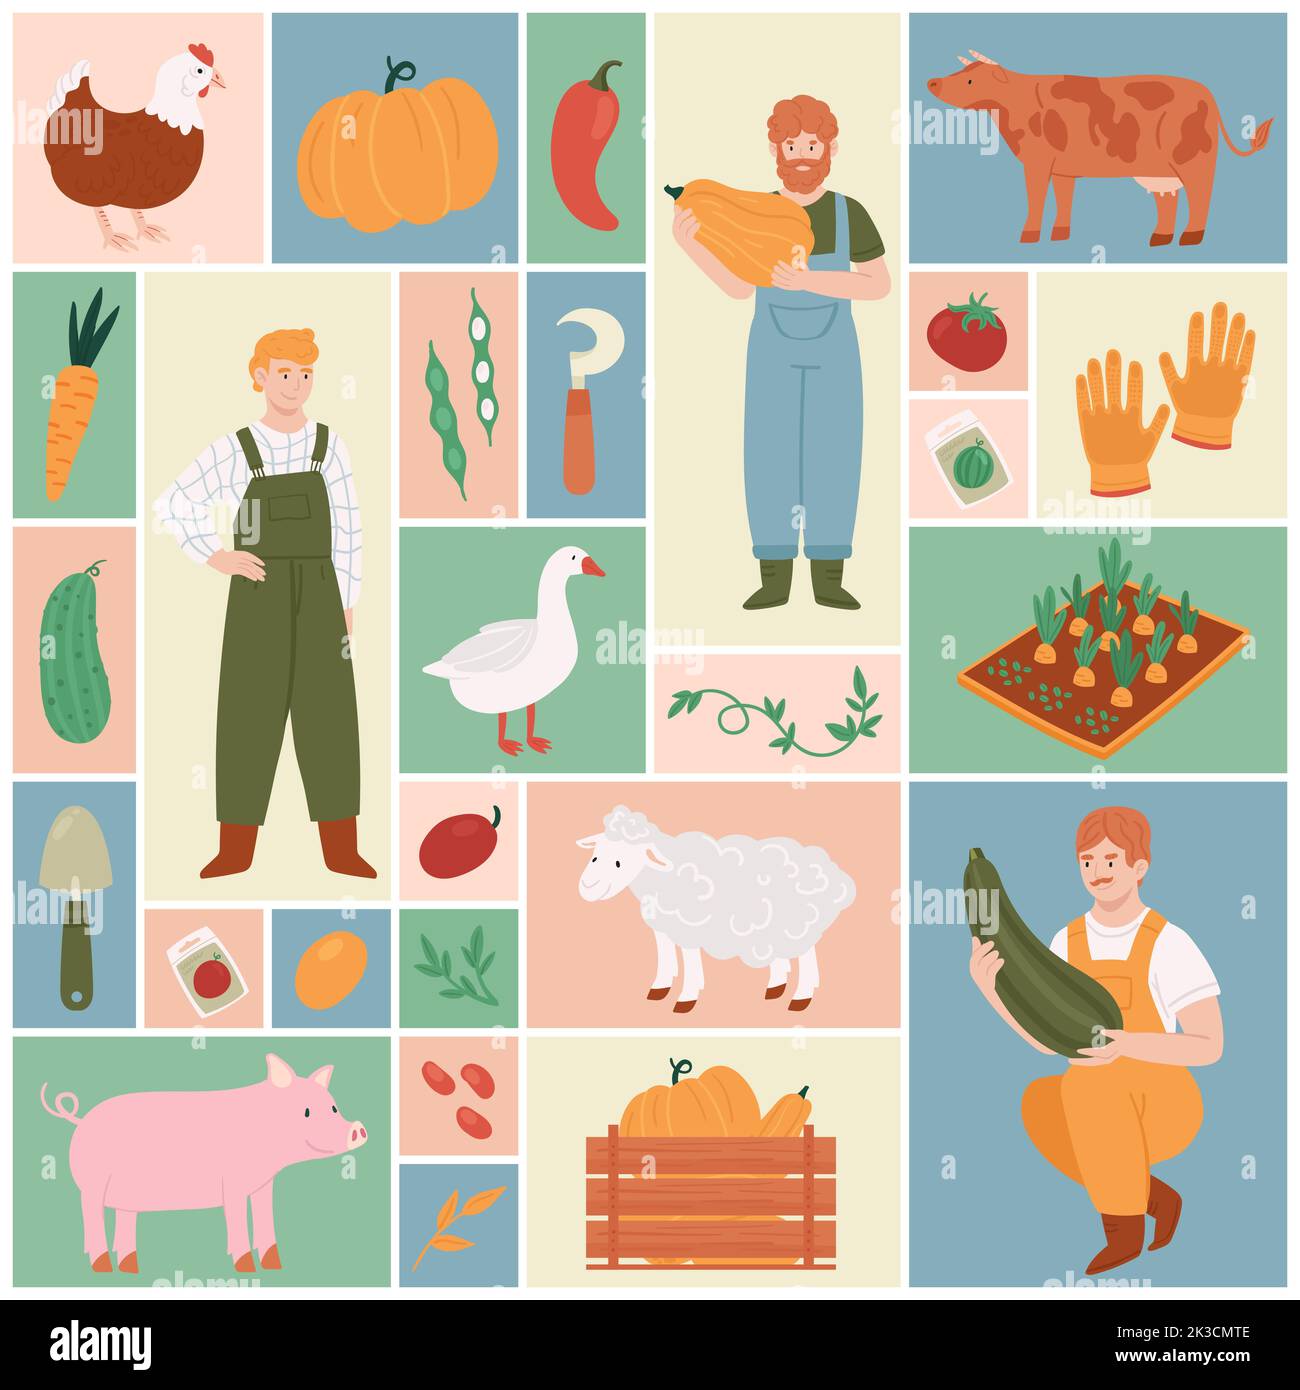 Farm local production, agriculture set vector illustration. Cartoon farmer characters grow harvest, domestic animals and poultry, organic vegetables, tools and plants in square collage background Stock Vector